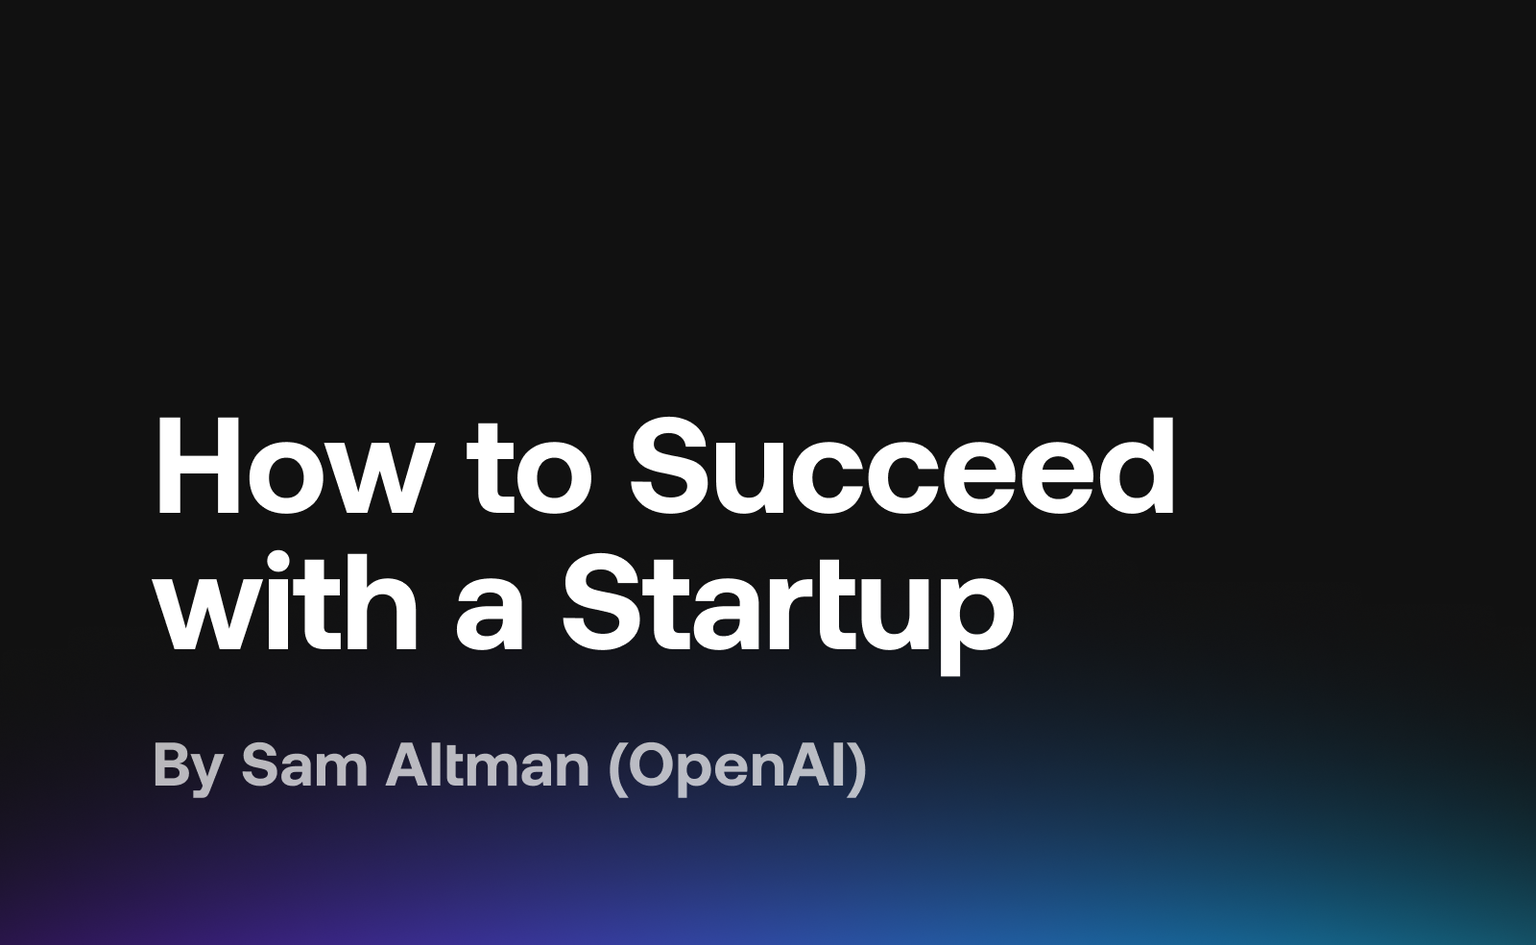 Sam Altman (OpenAI) on How to Succeed with a Startup